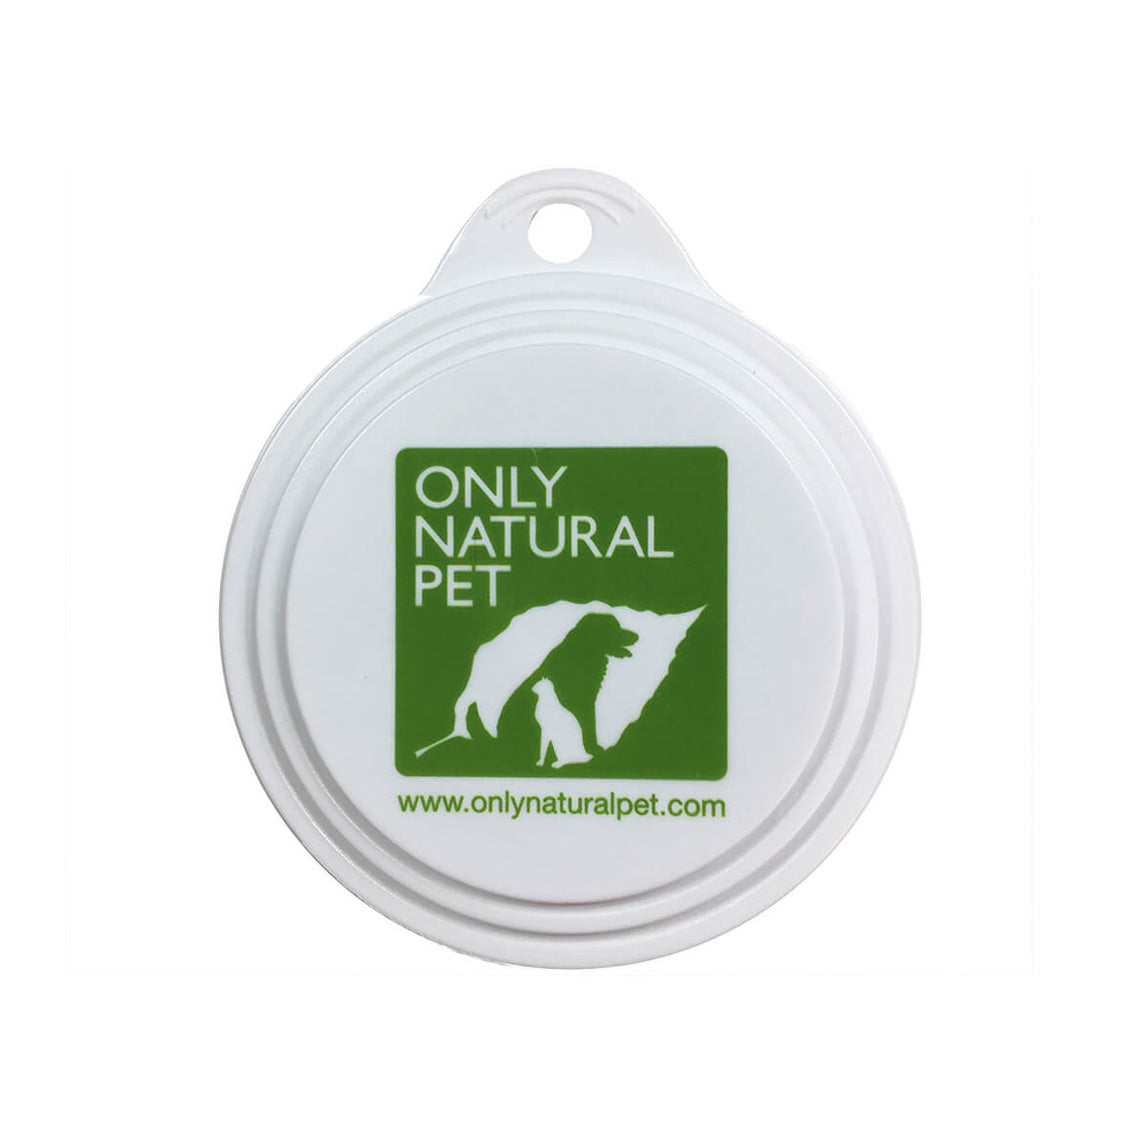 Only Natural Pet Store Reusable Canned Pet Food Lid